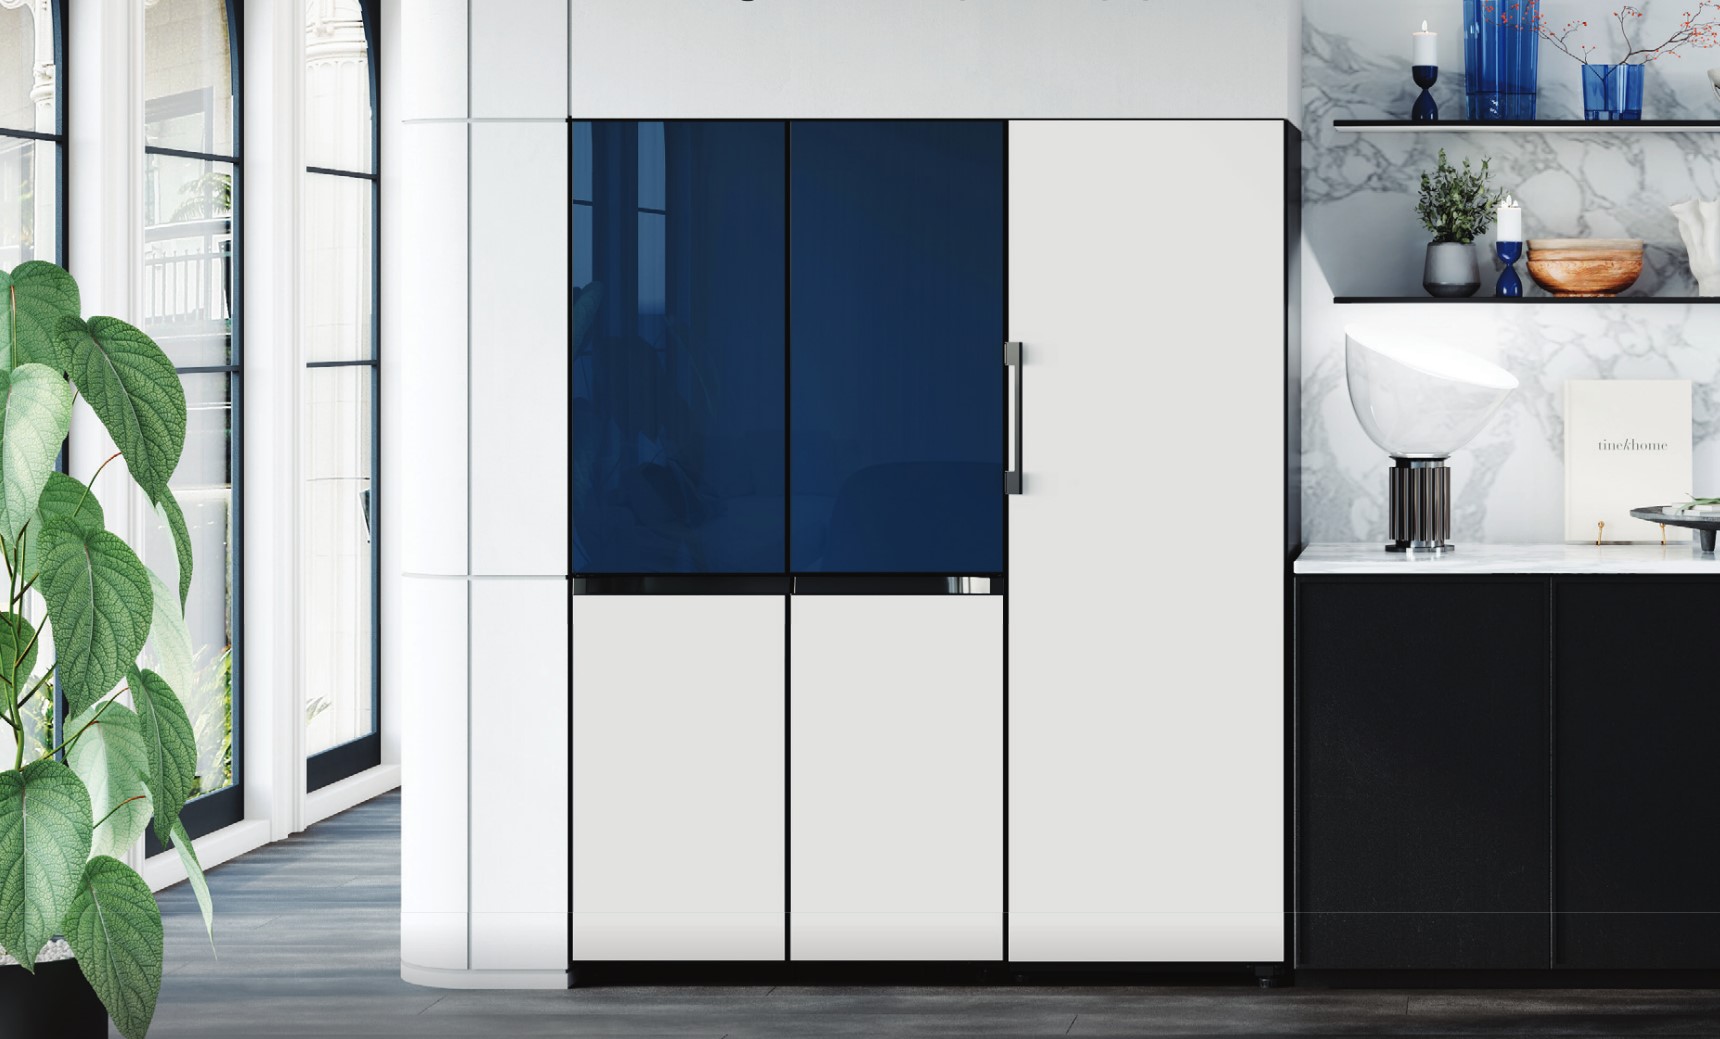 Samsung Bespoke Refrigerators for a premium touch